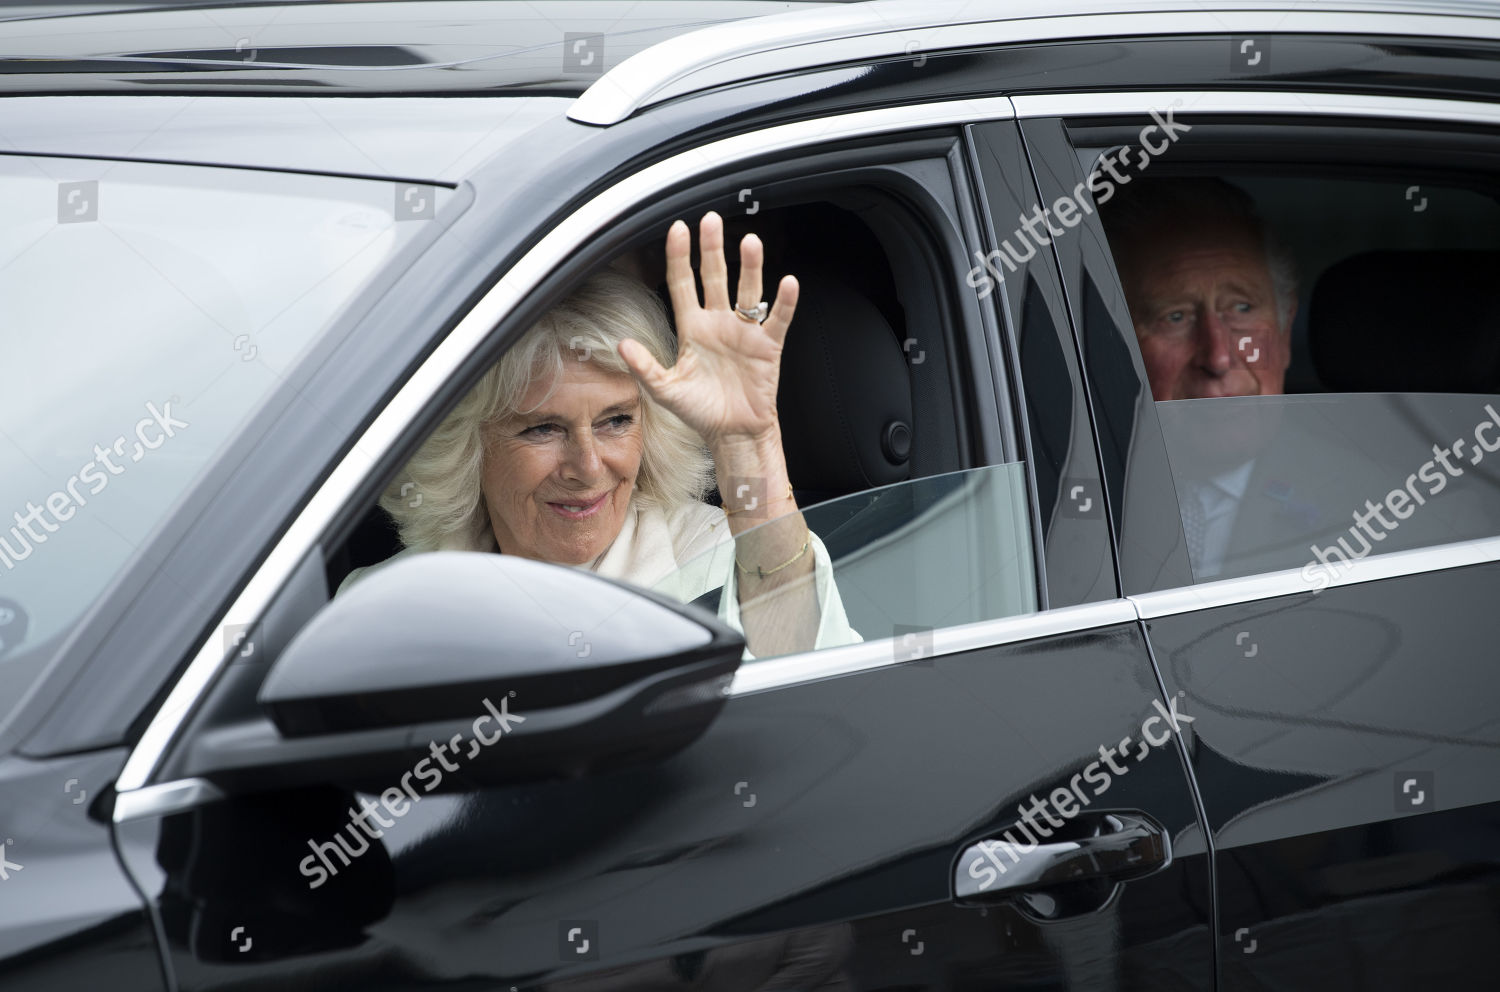 prince-charles-and-camilla-duchess-of-cornwall-visit-to-gloucester-uk-shutterstock-editorial-10706502b.jpg